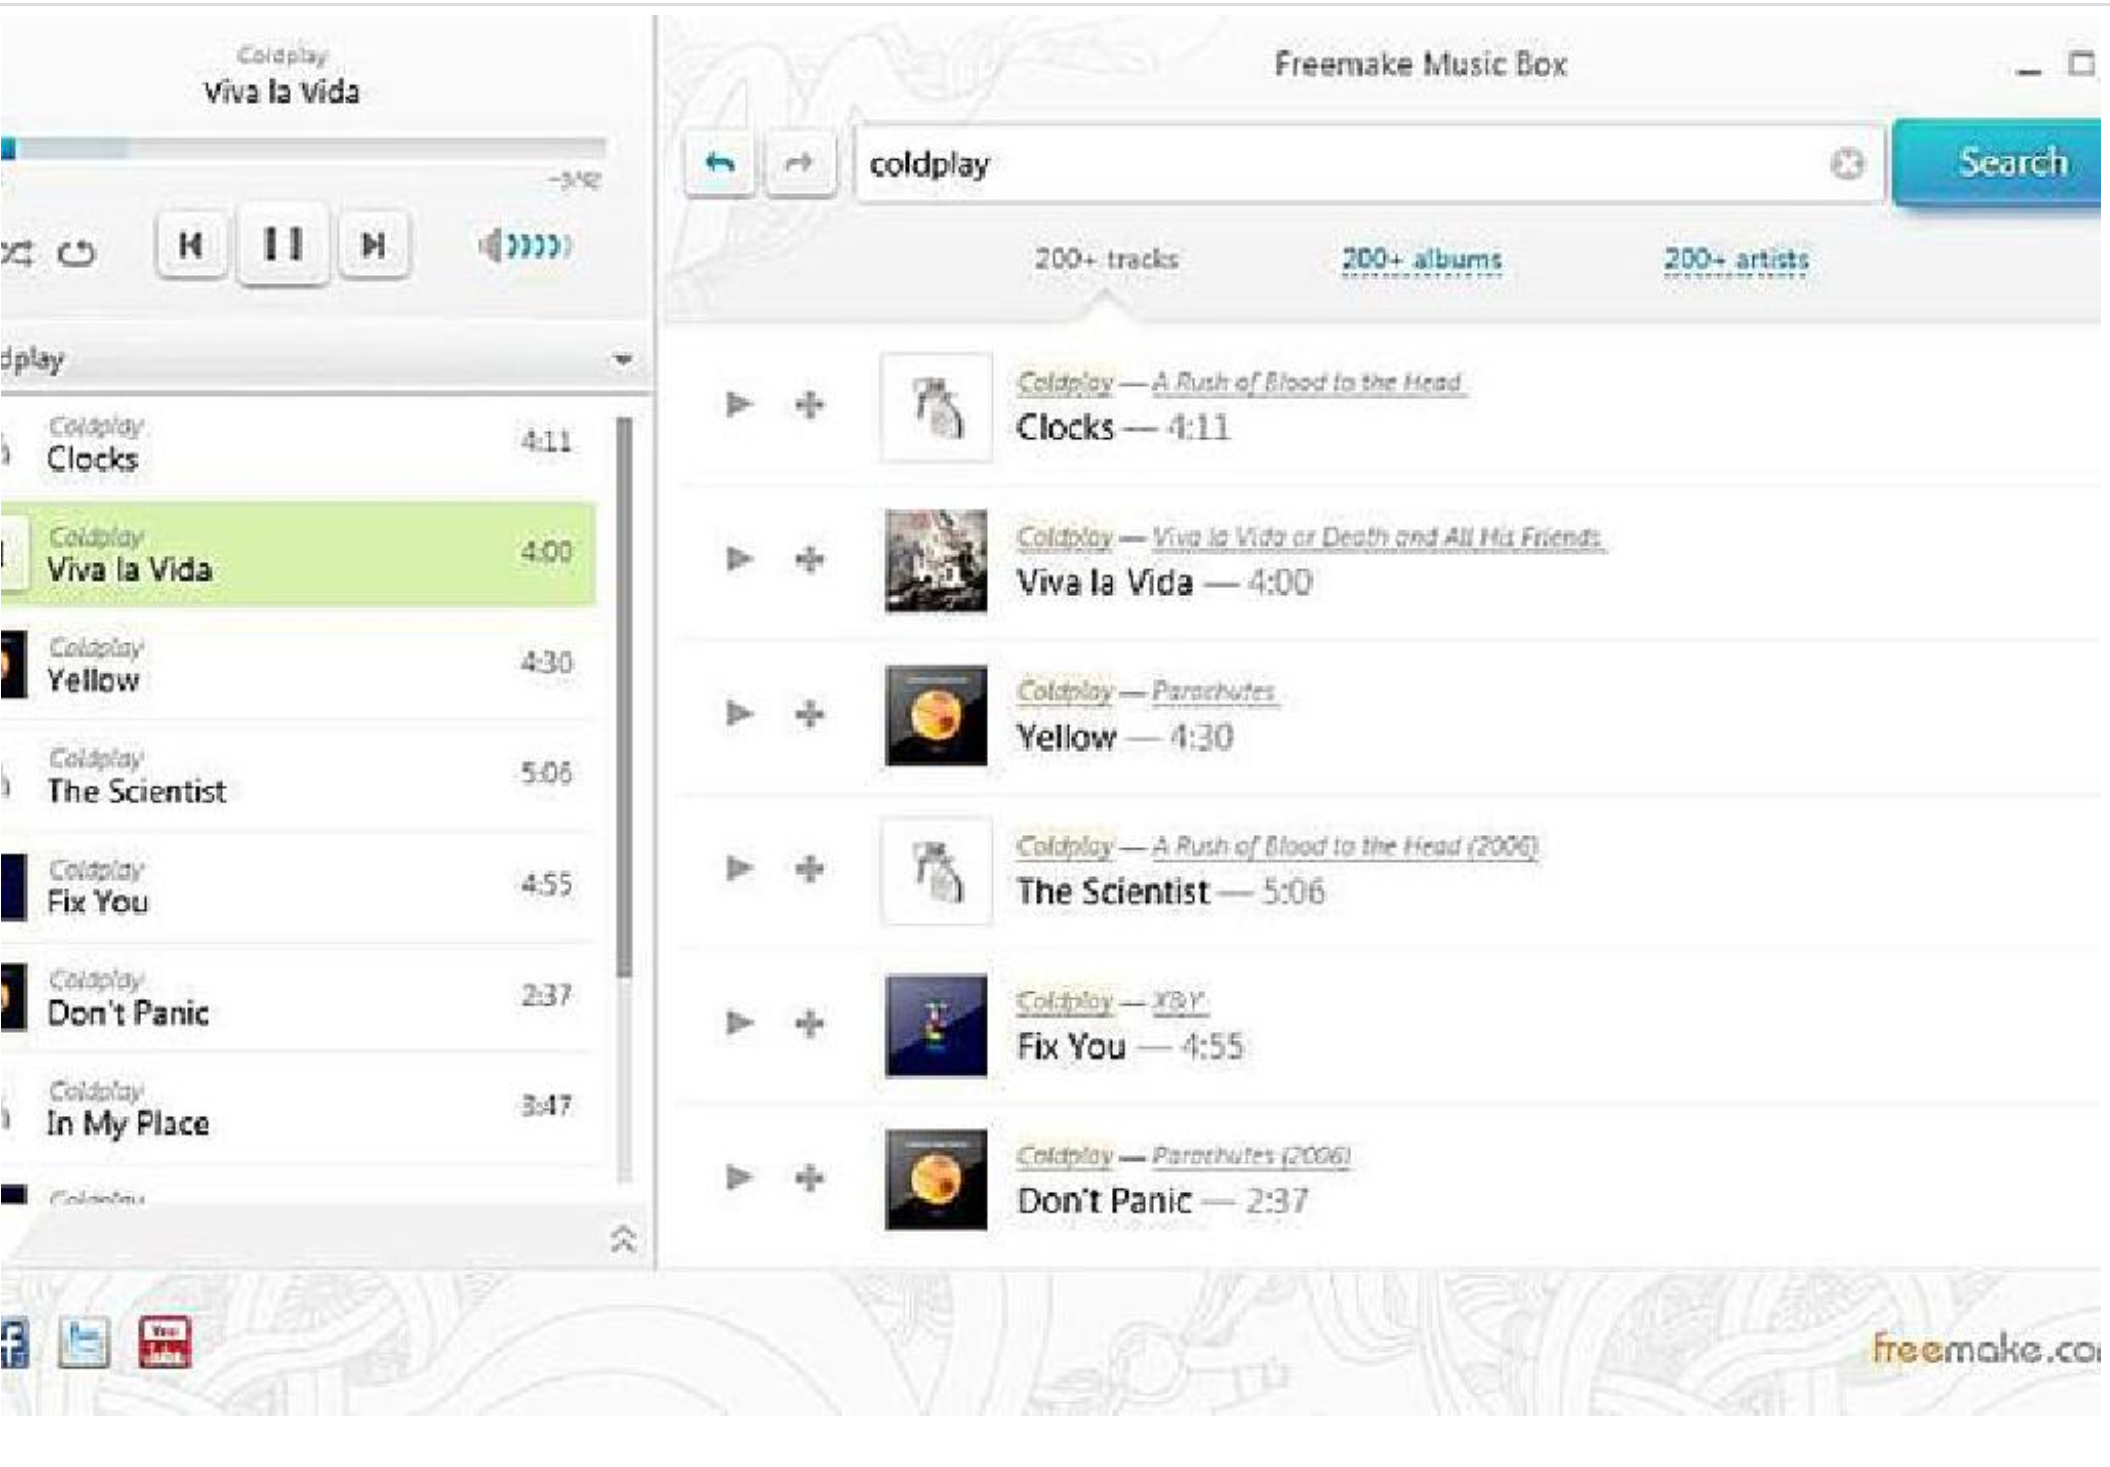 Freemake Music Box Review: Stream Free and Legal Music